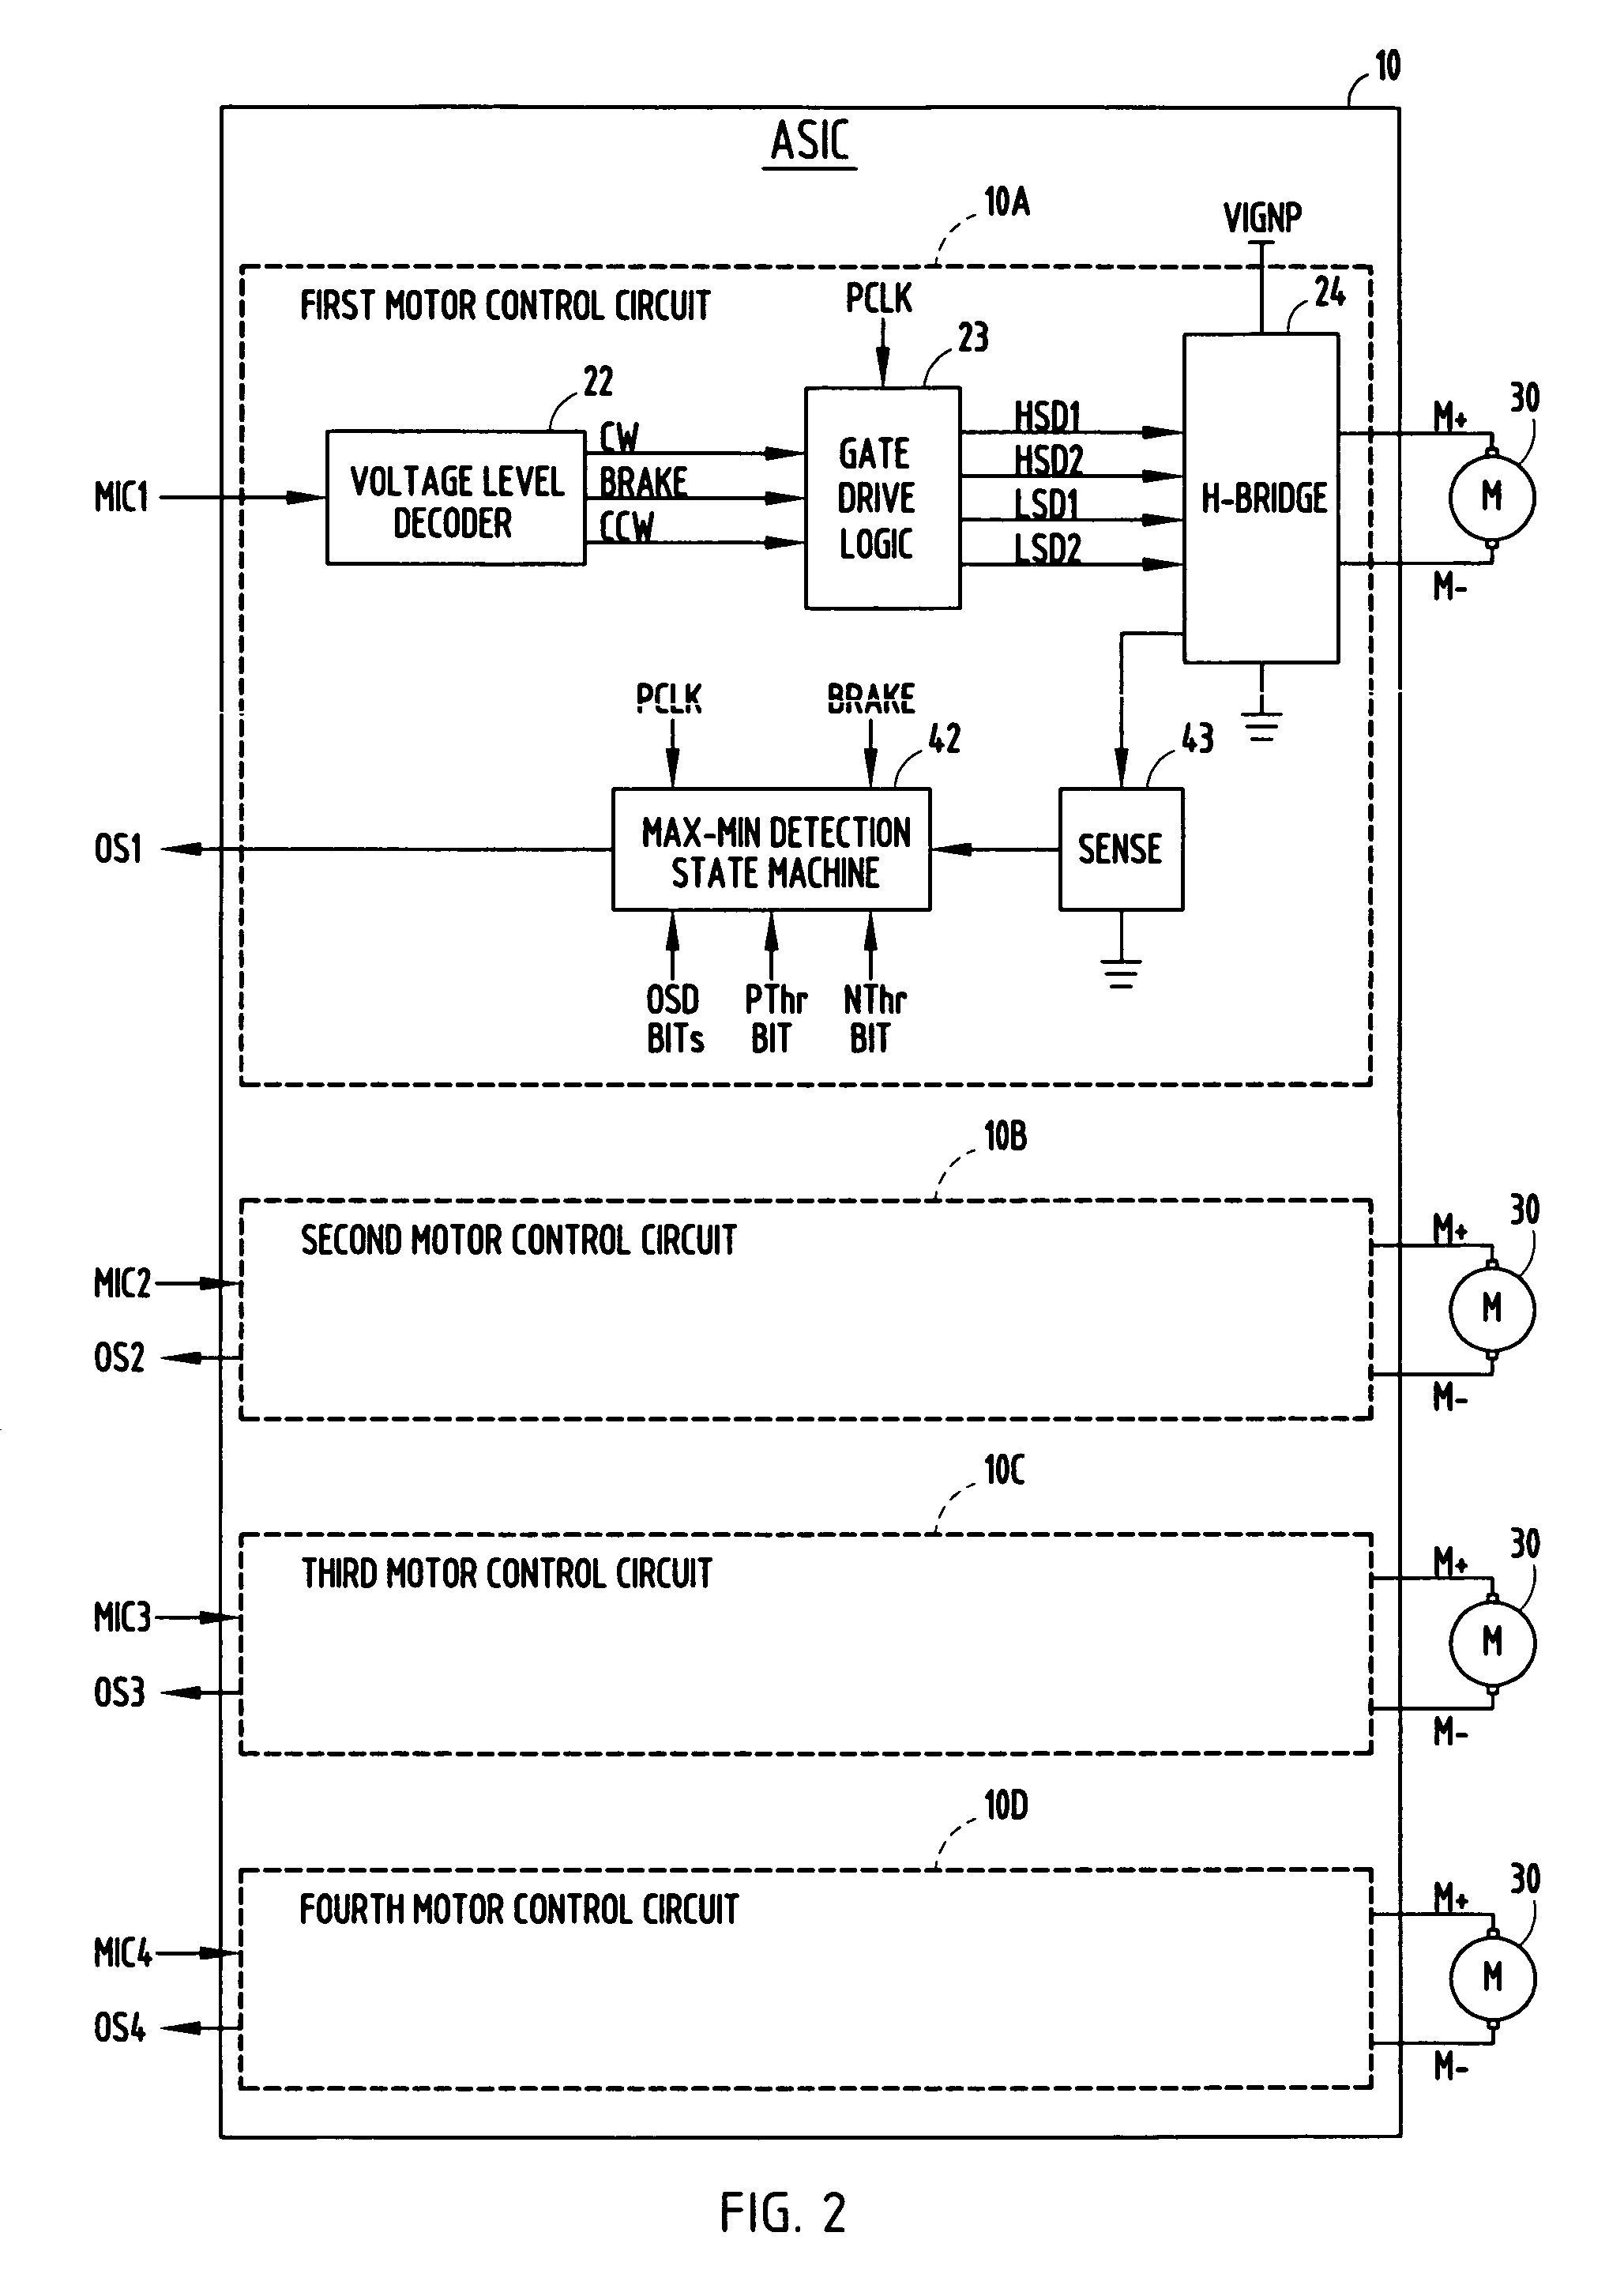 Method of brake pulse rejection in commutation pulse detection circuits